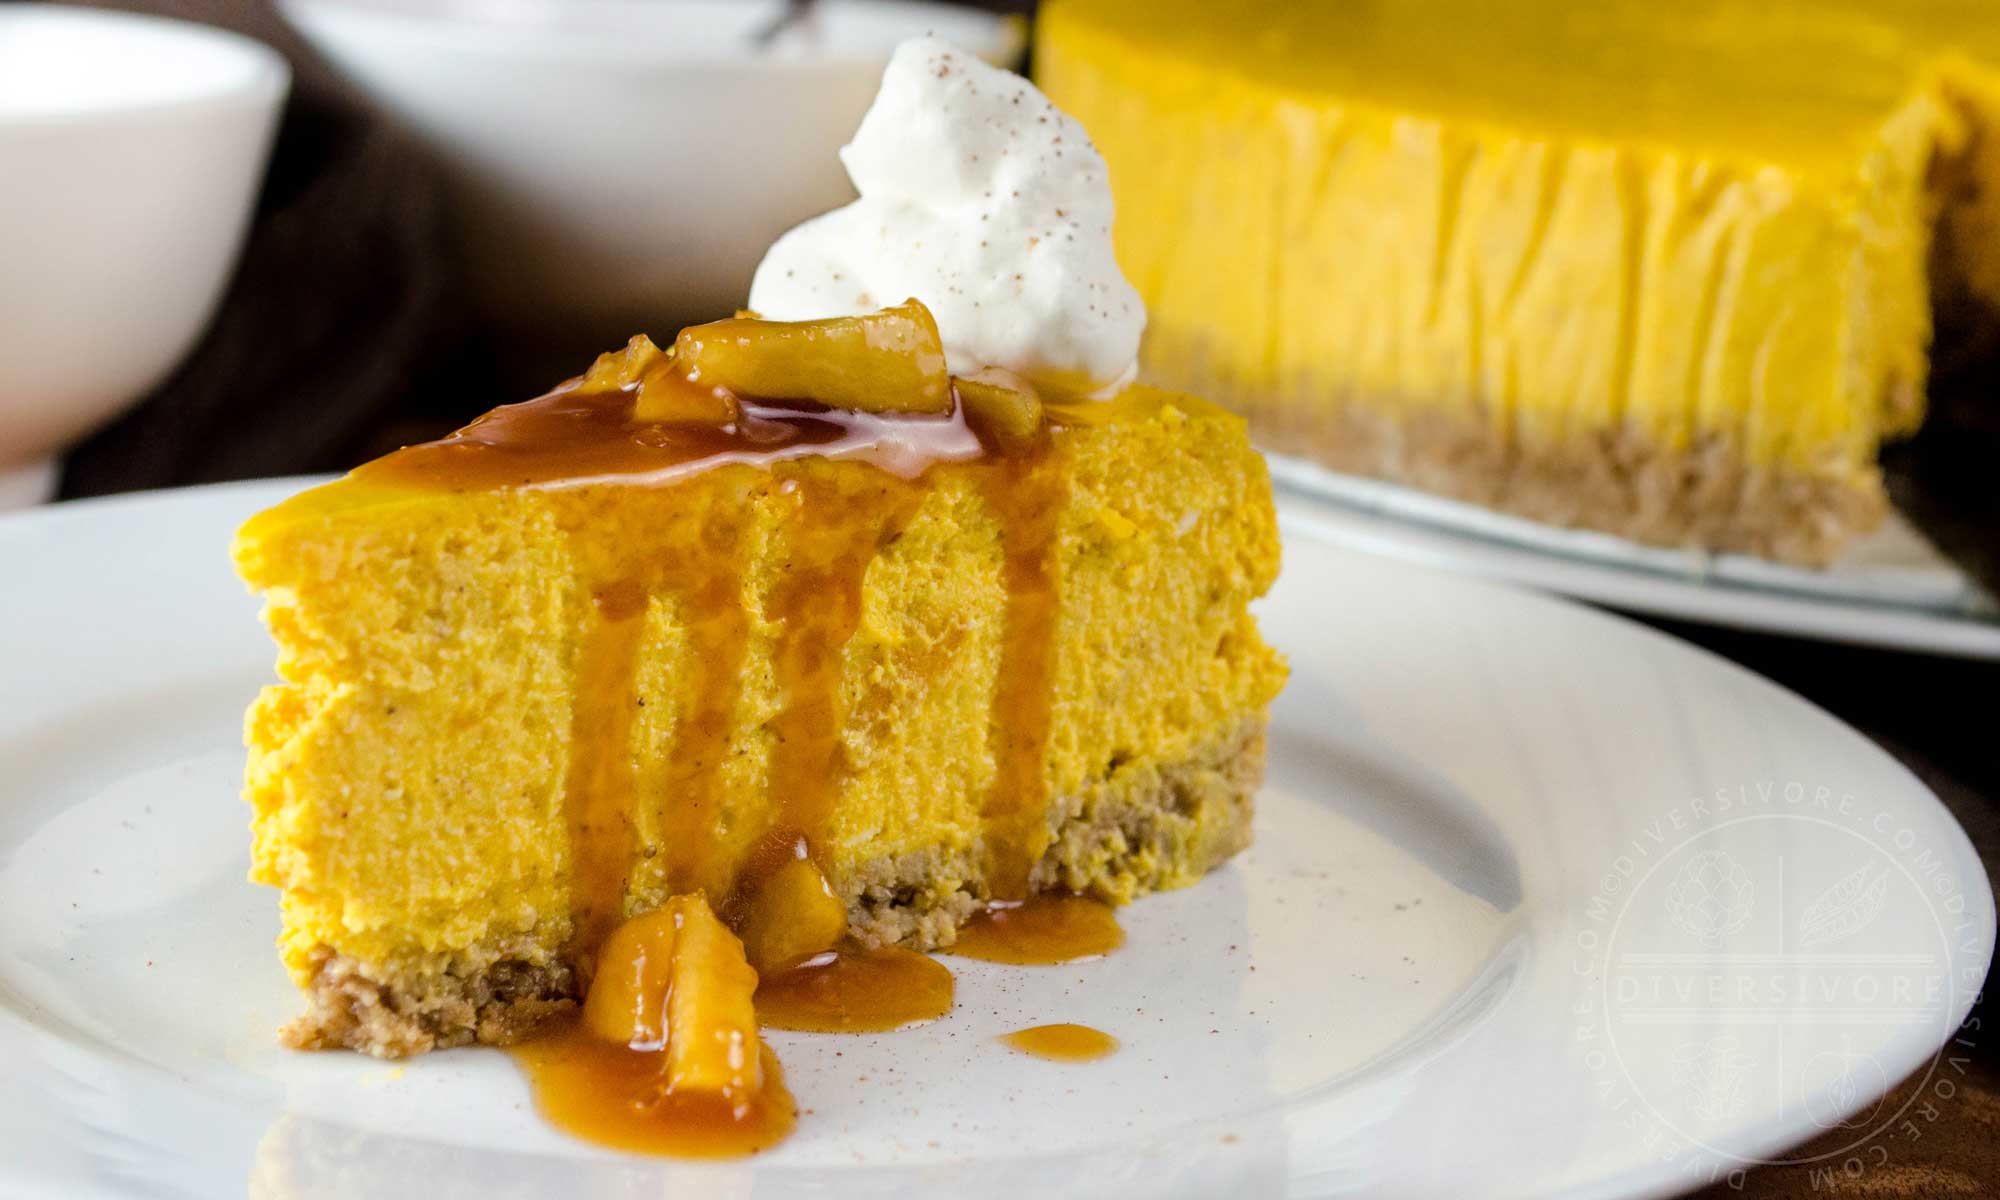 Pumpkin apple cheesecake with apple caramel sauce, whipped cream, and a gluten-free oat crust